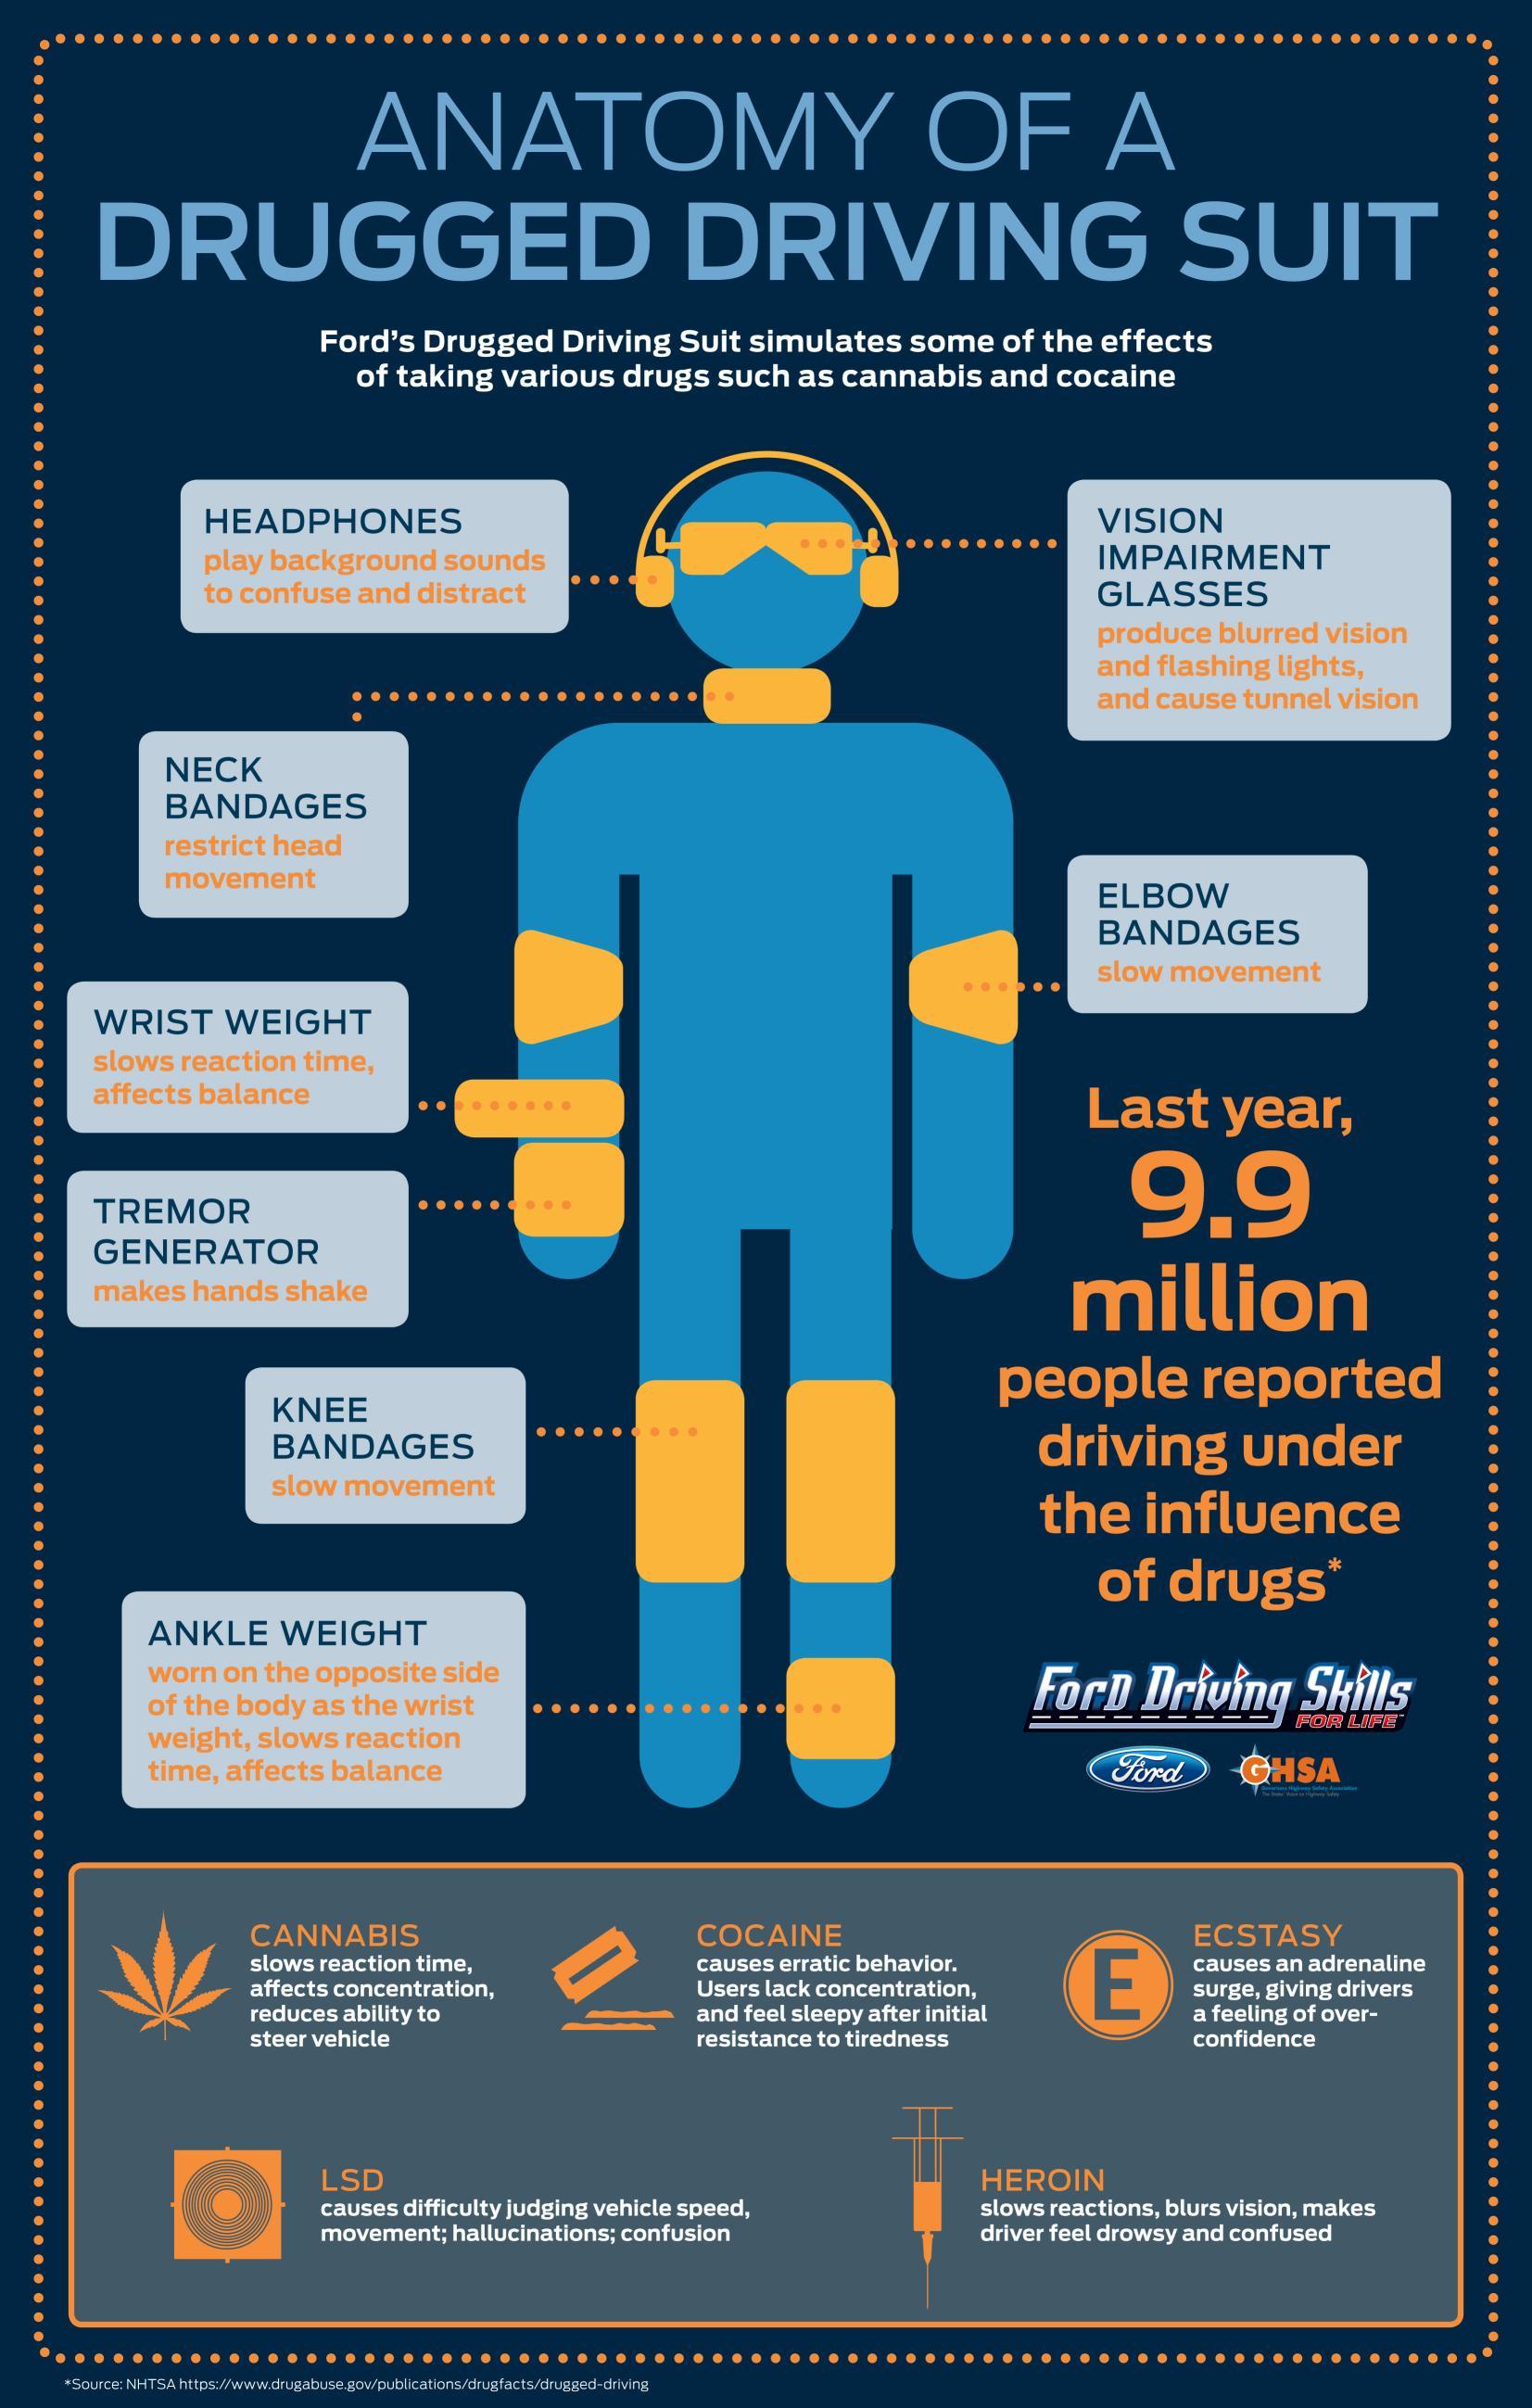 Drugged-Driving-Suit-Infographic